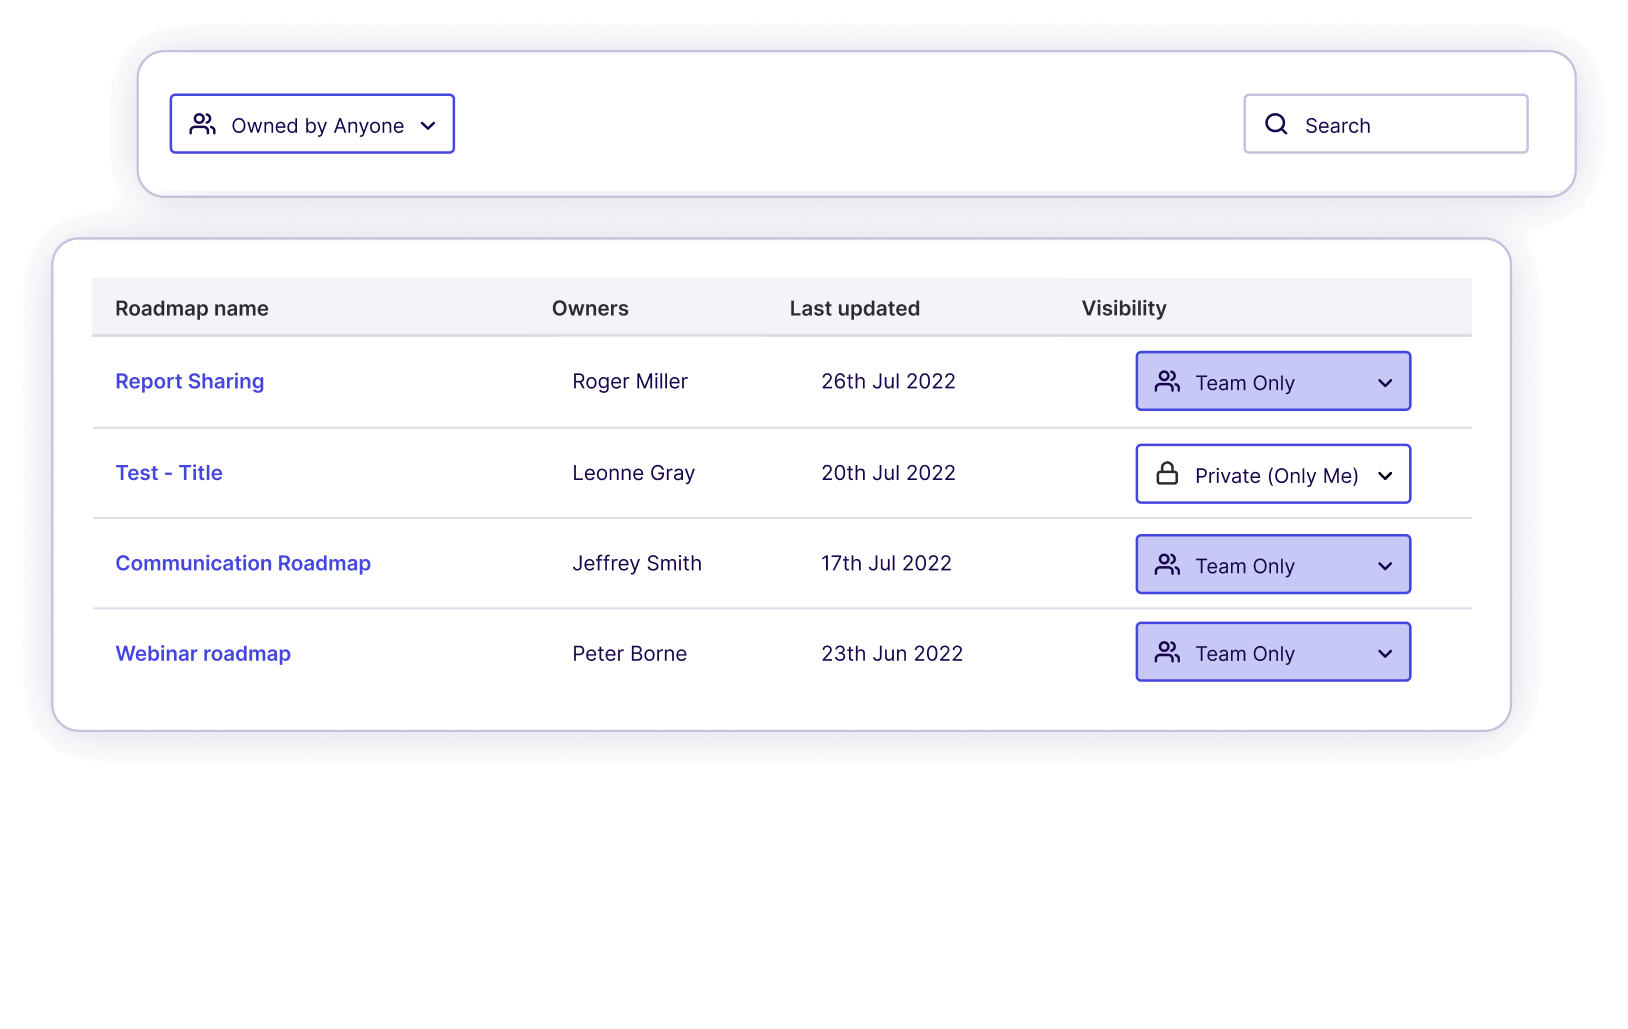 Product Roadmaps - Build private and team roadmaps